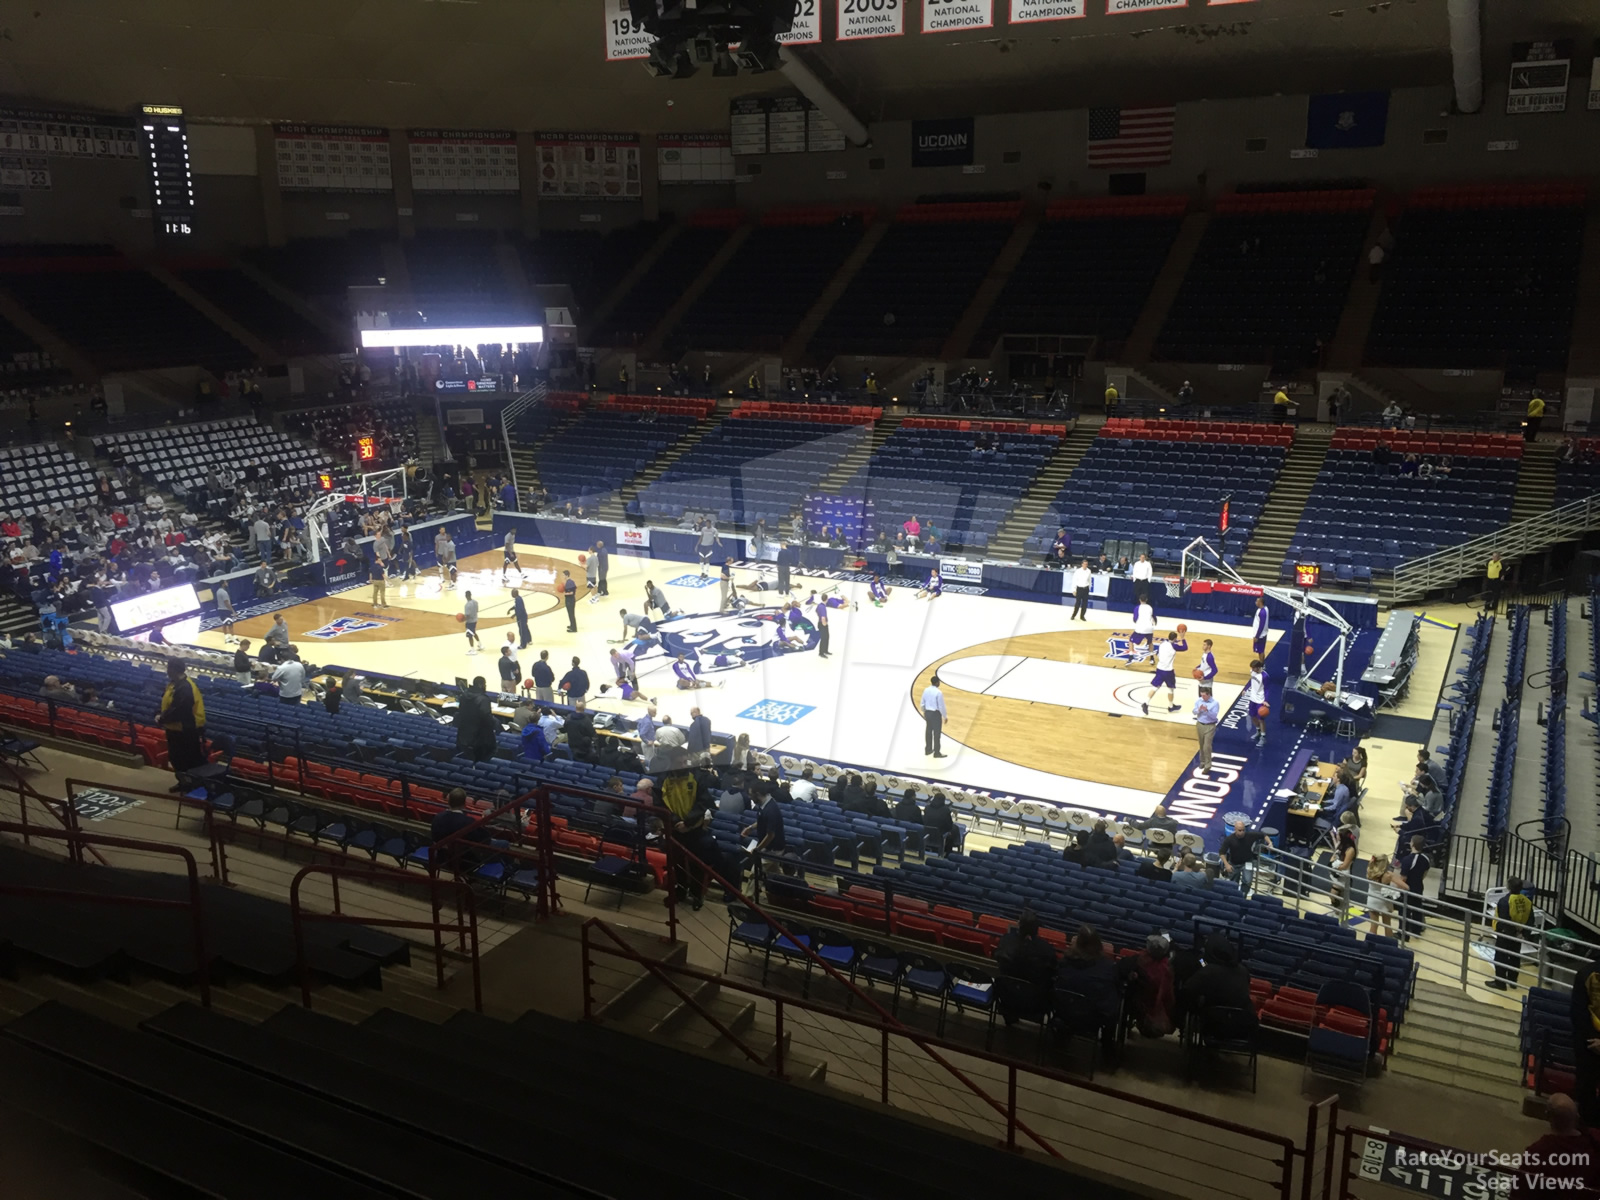 section 218, row n seat view  - gampel pavilion